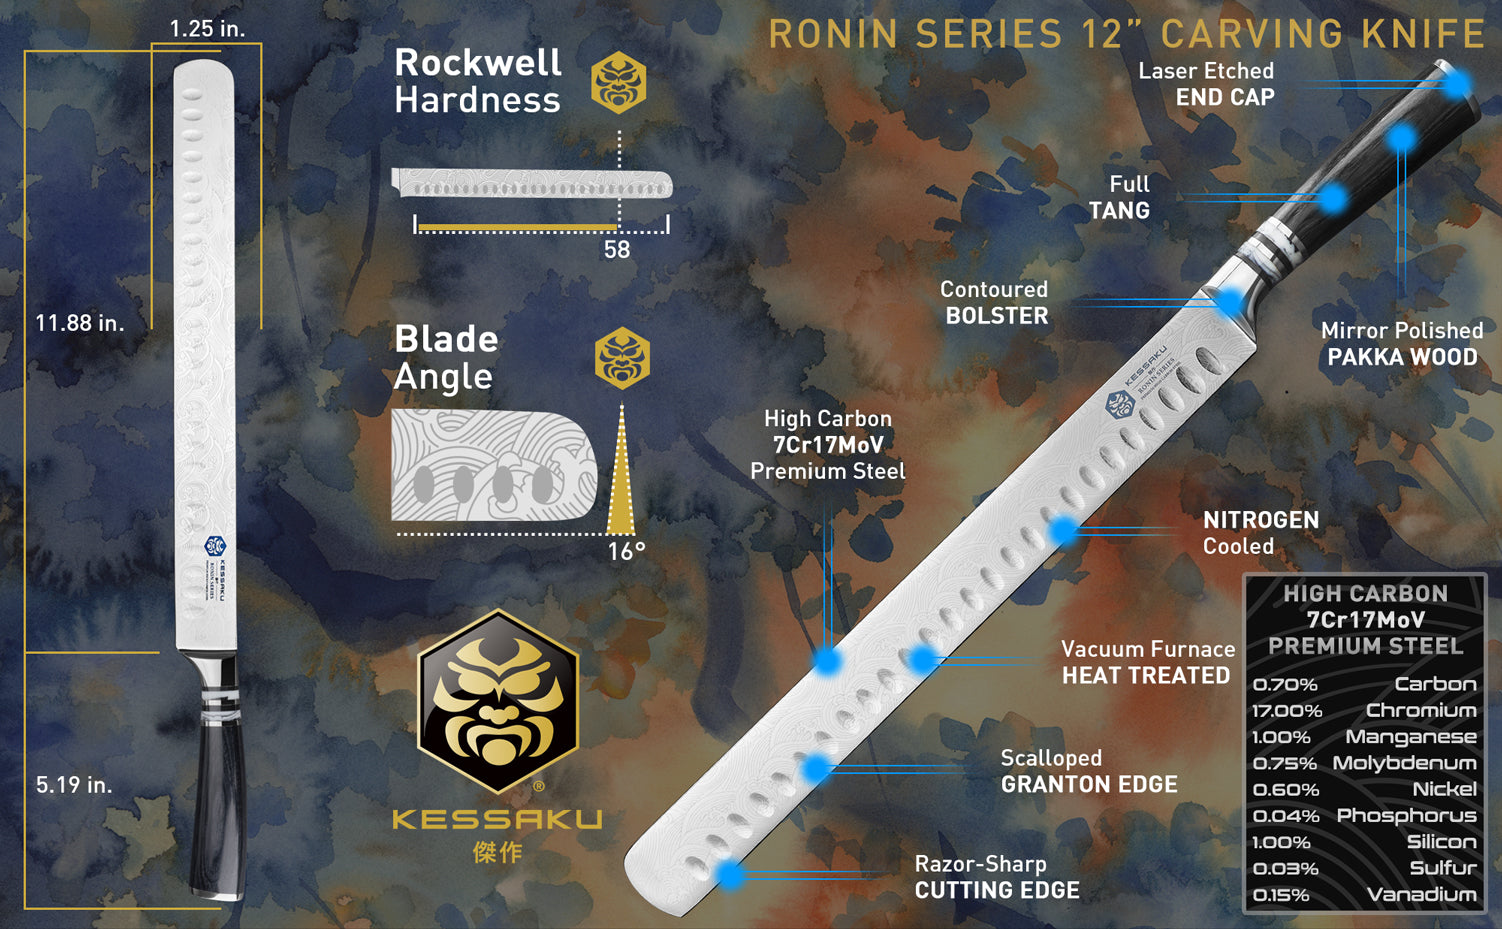 The Kessaku Ronin Series 12-Inch Carving Knife's features, dimensions, and steel composition